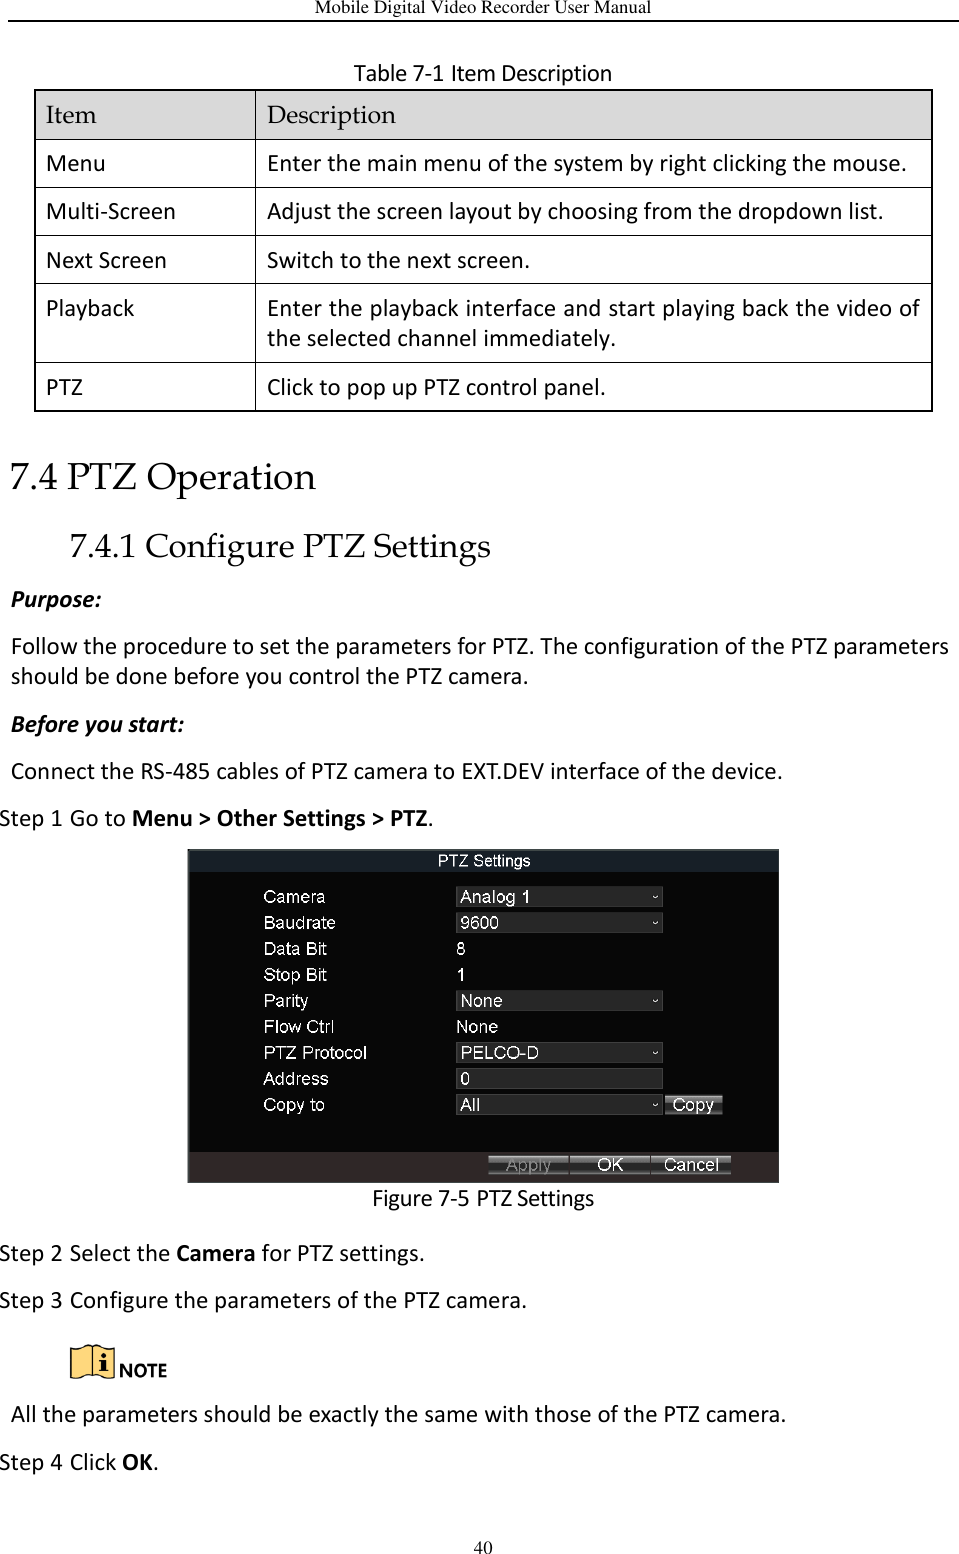 Mobile Digital Video Recorder User Manual 40 Table 7-1 Item Description 7.4 PTZ Operation 7.4.1 Configure PTZ Settings Purpose: Follow the procedure to set the parameters for PTZ. The configuration of the PTZ parameters should be done before you control the PTZ camera. Before you start: Connect the RS-485 cables of PTZ camera to EXT.DEV interface of the device. Step 1 Go to Menu &gt; Other Settings &gt; PTZ.  Figure 7-5 PTZ Settings Step 2 Select the Camera for PTZ settings. Step 3 Configure the parameters of the PTZ camera.   All the parameters should be exactly the same with those of the PTZ camera. Step 4 Click OK. Item Description Menu Enter the main menu of the system by right clicking the mouse. Multi-Screen Adjust the screen layout by choosing from the dropdown list. Next Screen Switch to the next screen. Playback Enter the playback interface and start playing back the video of the selected channel immediately. PTZ Click to pop up PTZ control panel. 